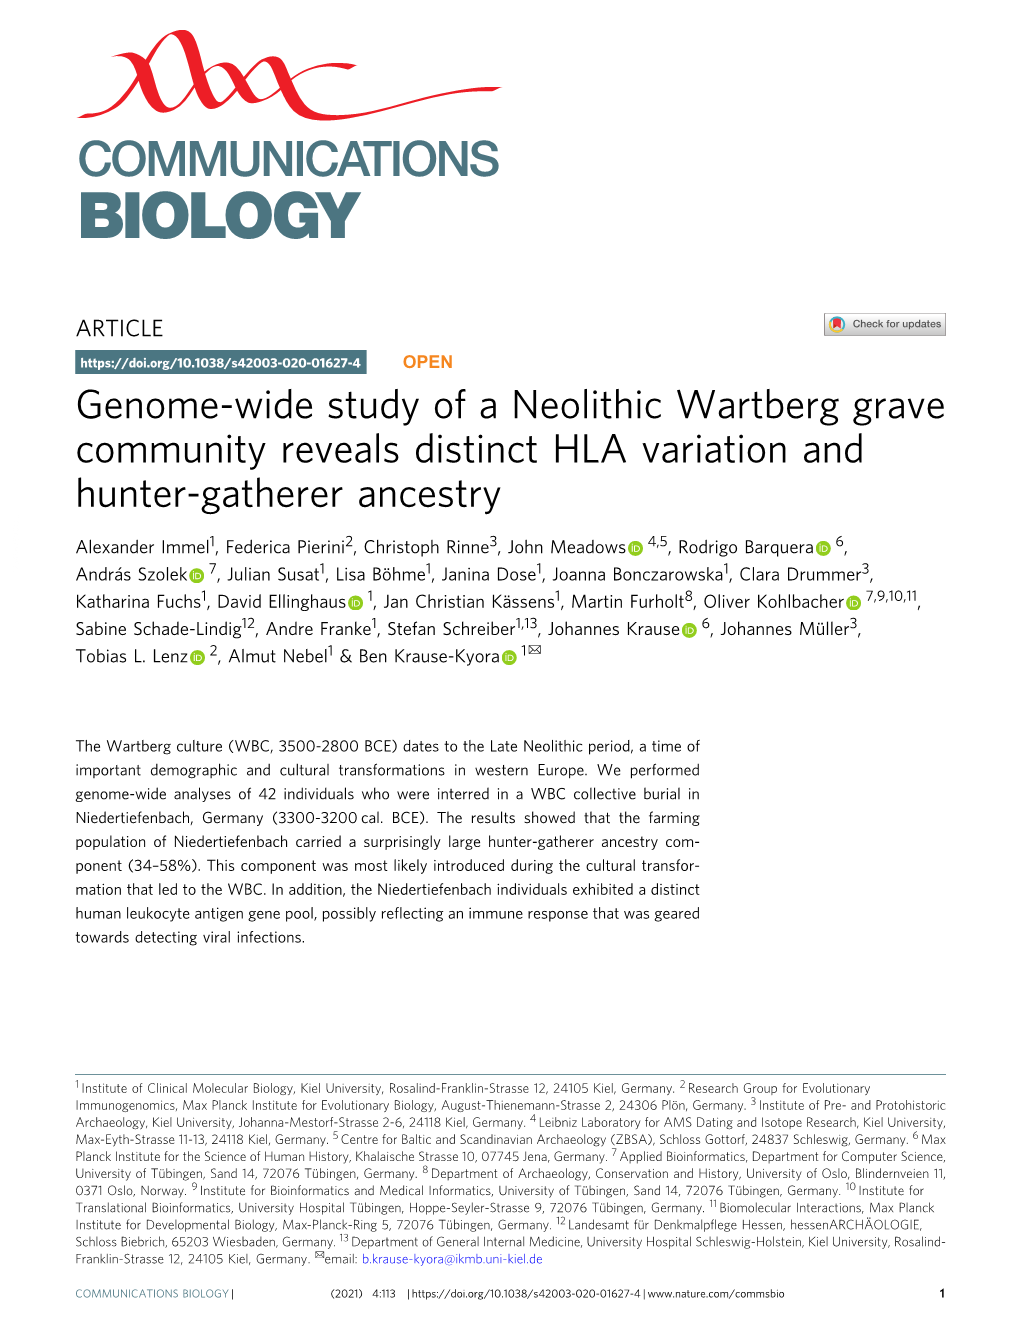 Genome-Wide Study of a Neolithic Wartberg Grave Community Reveals Distinct HLA Variation and Hunter-Gatherer Ancestry